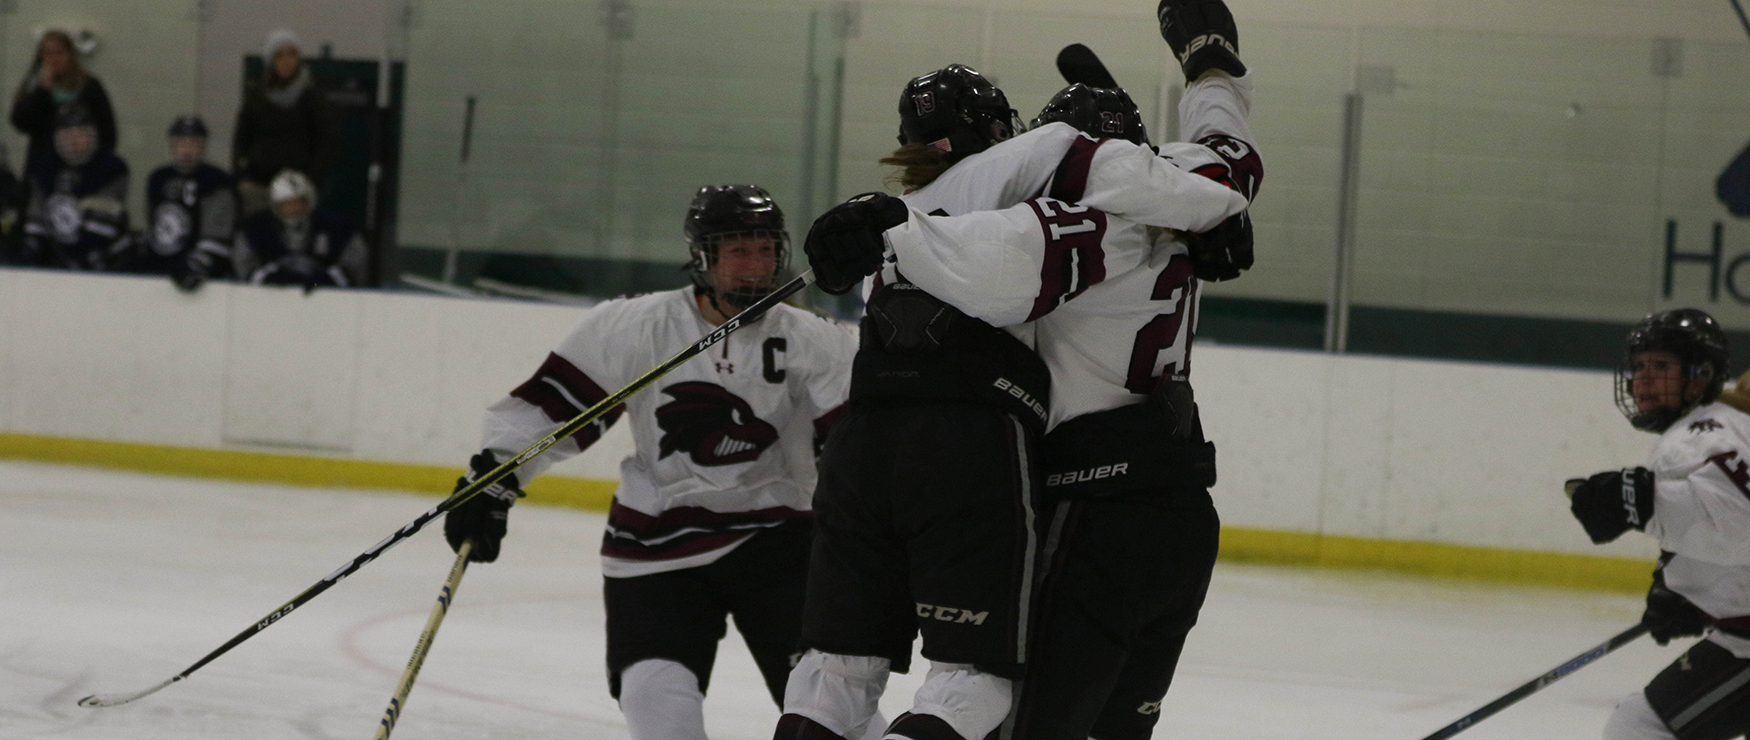 PREVIEW: Women’s Ice Hockey Opens NEWHA Open Tournament Wednesday vs. Saint Michael’s